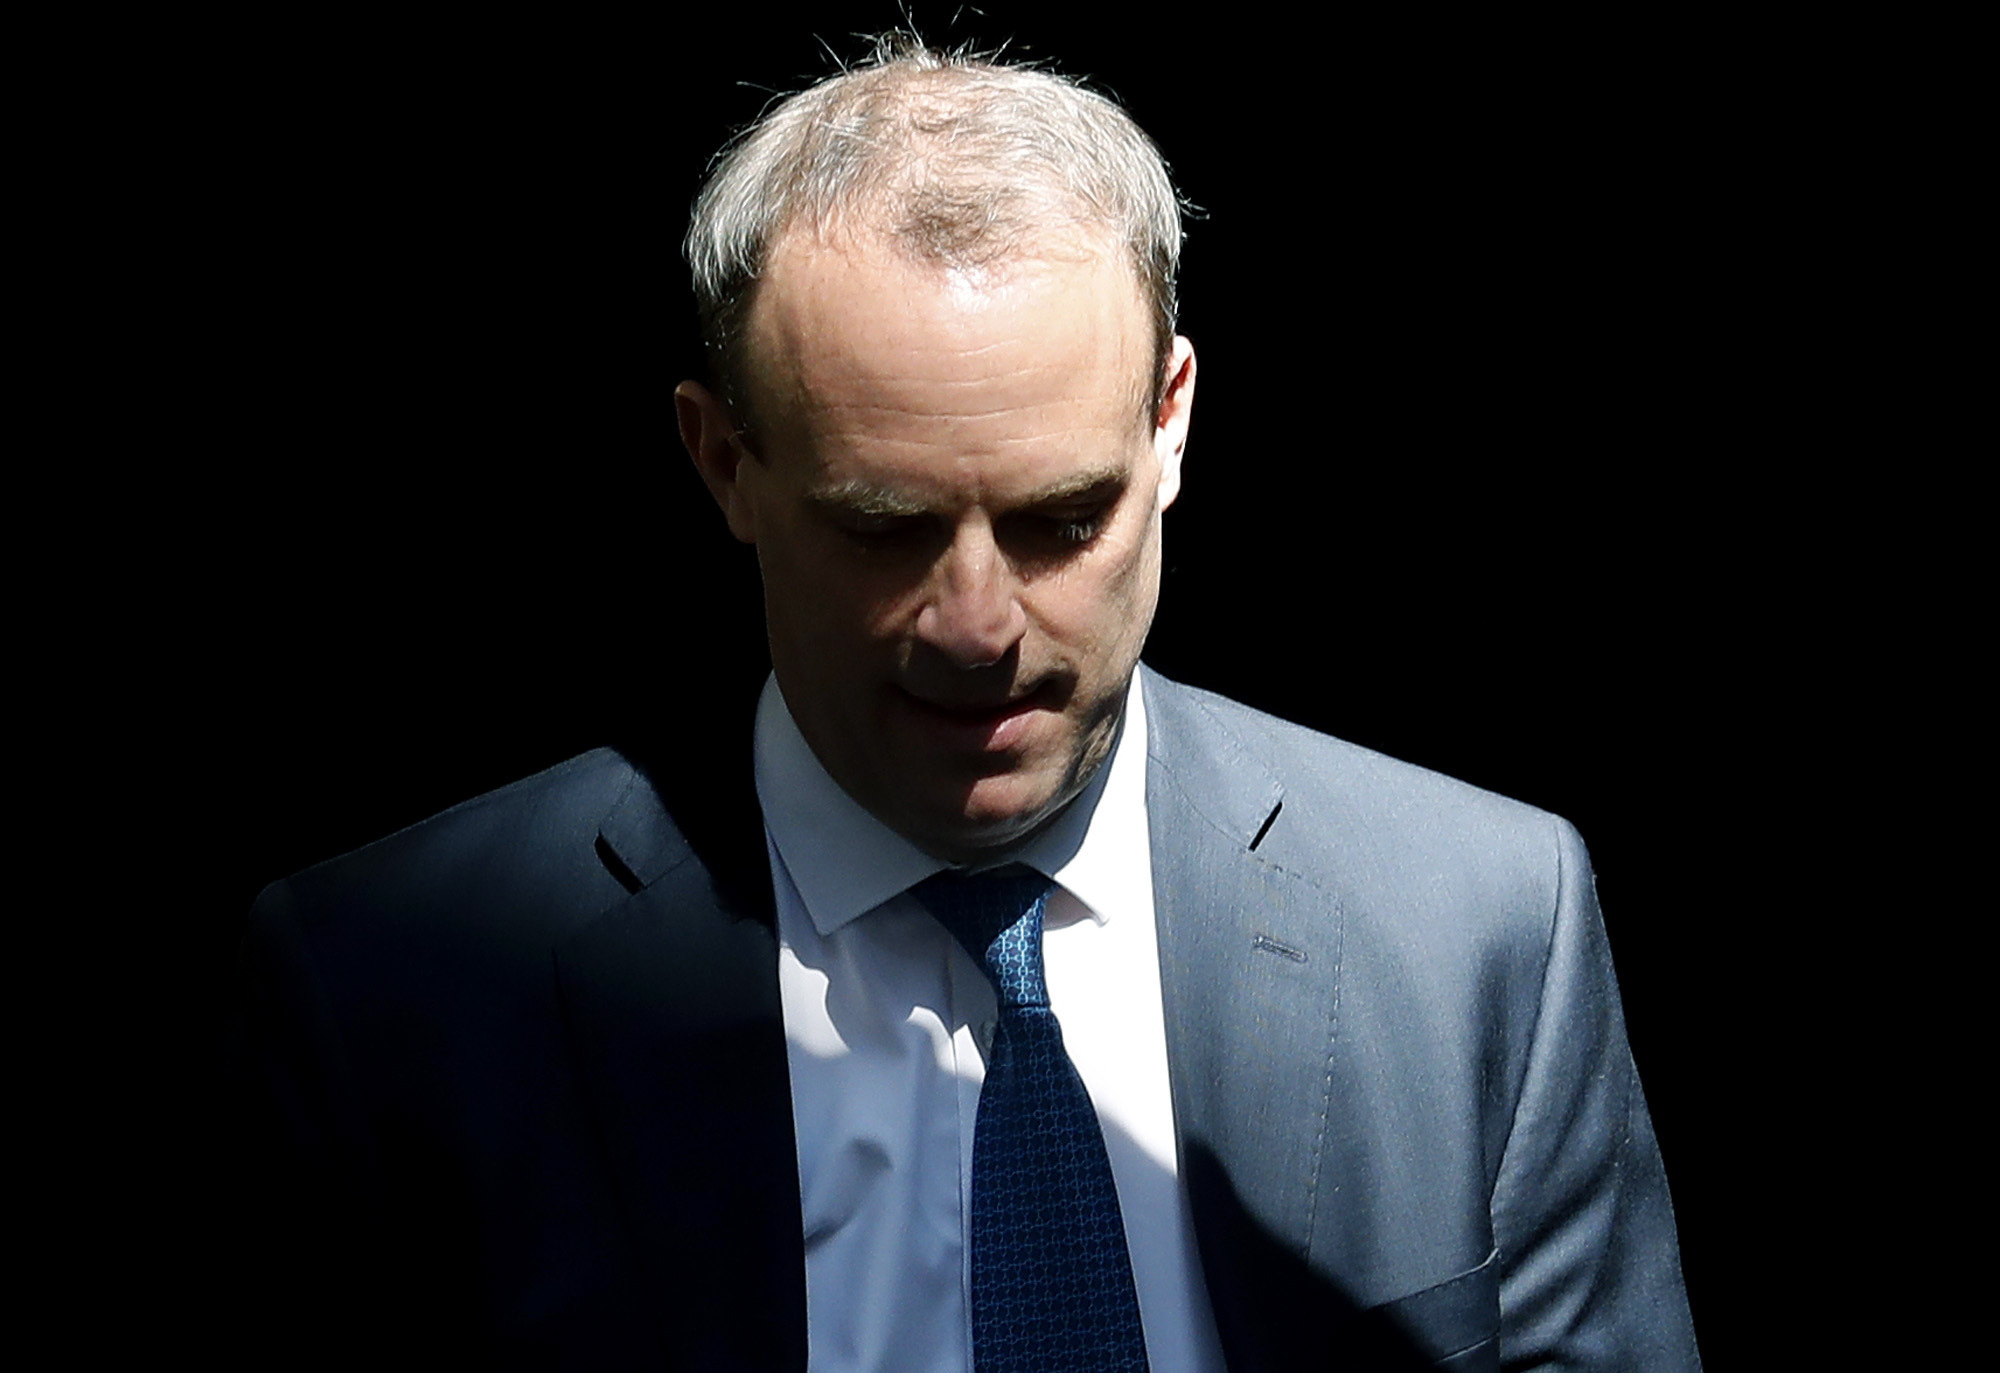 Dominic Raab and the power of humility